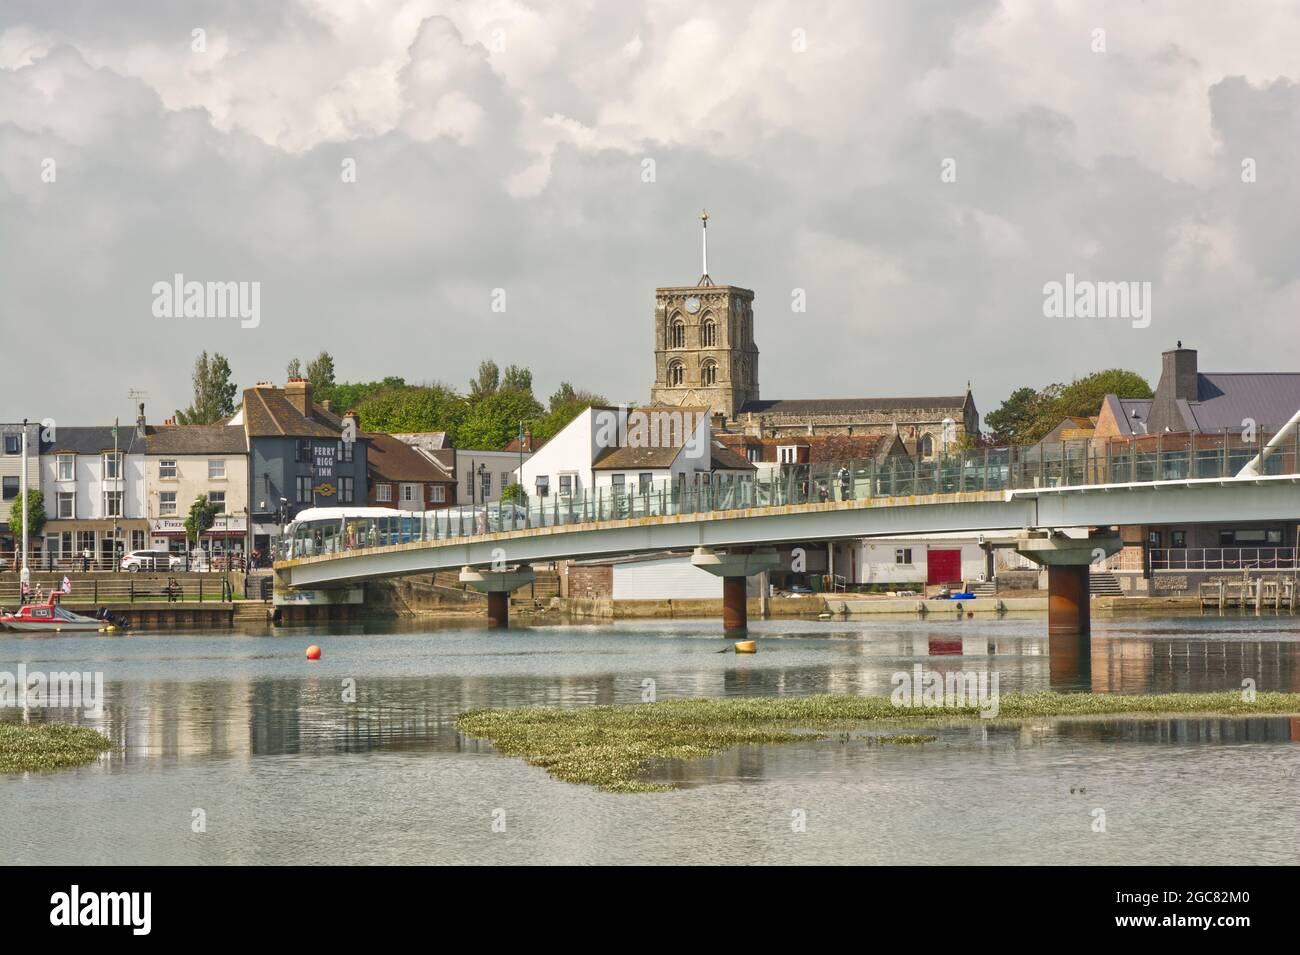 Footbridge over River Adur at Shoreham, West Sussex, England. With town behind and people walking around. Stock Photo